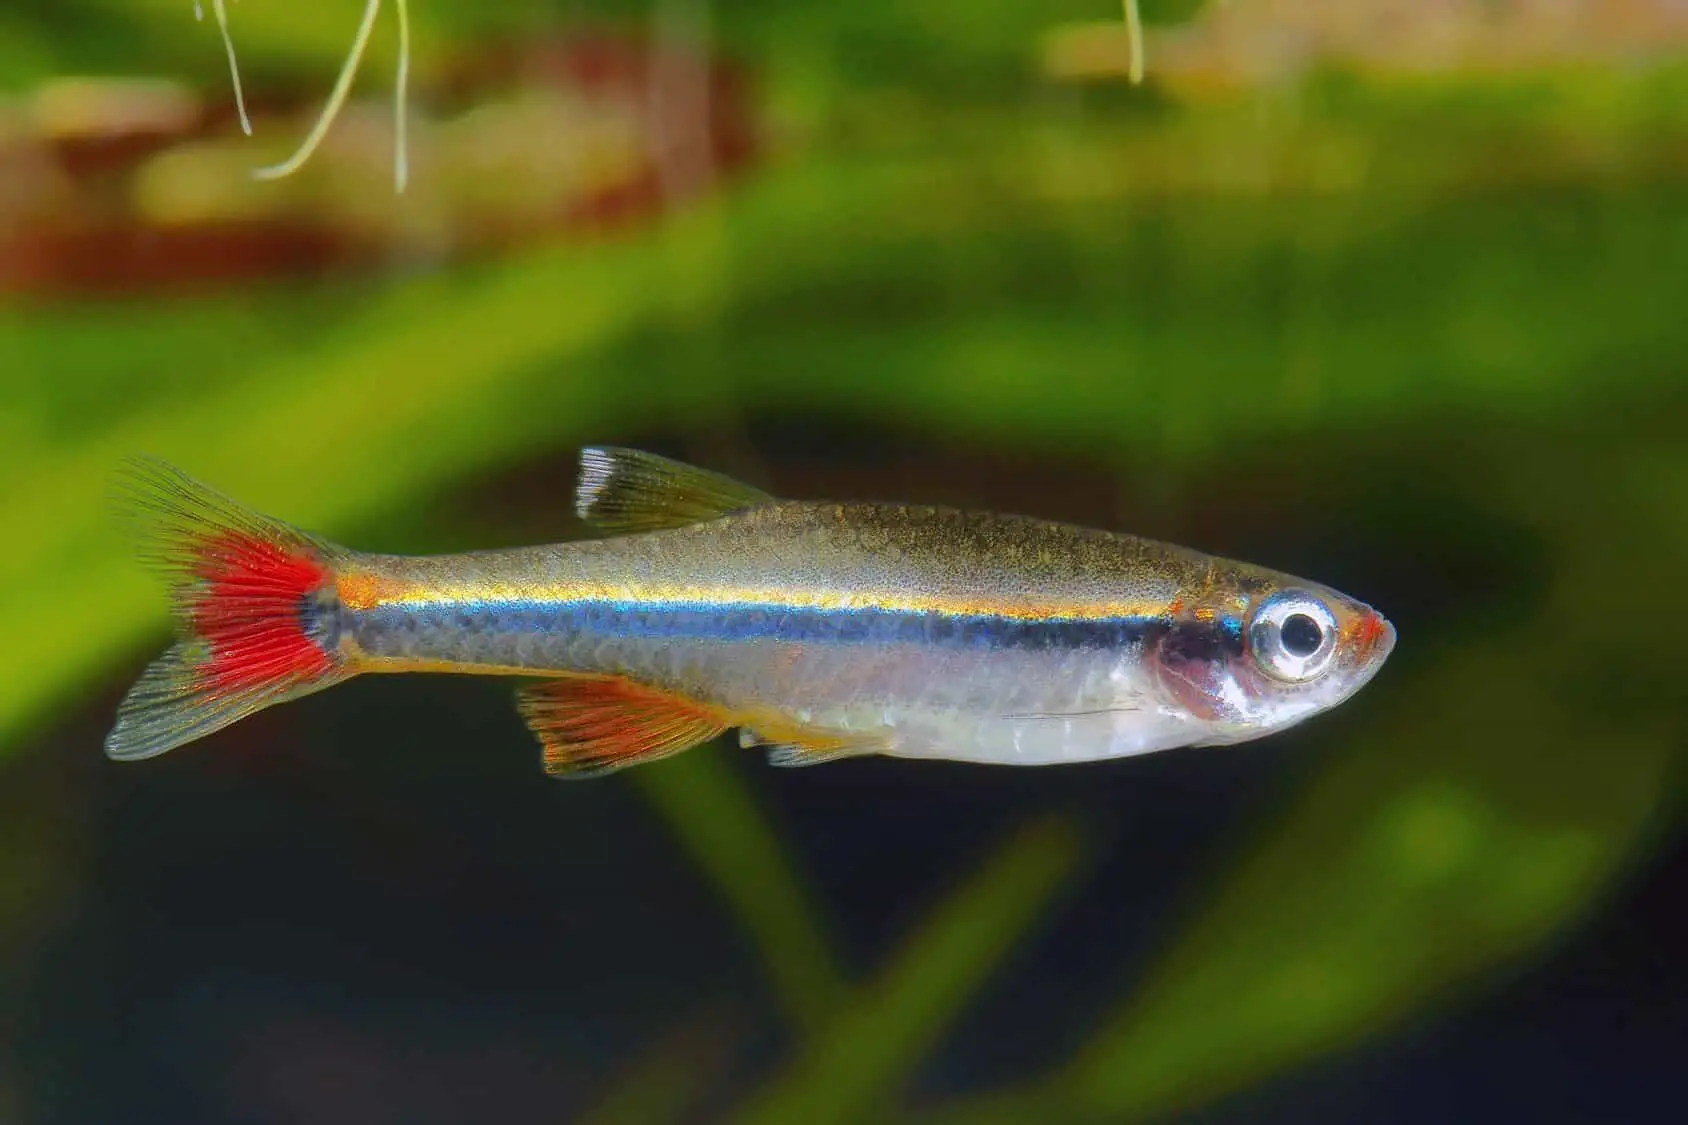 White Cloud Mountain Minnow: Caring For These Colorful Community Fish | Fishkeeping World